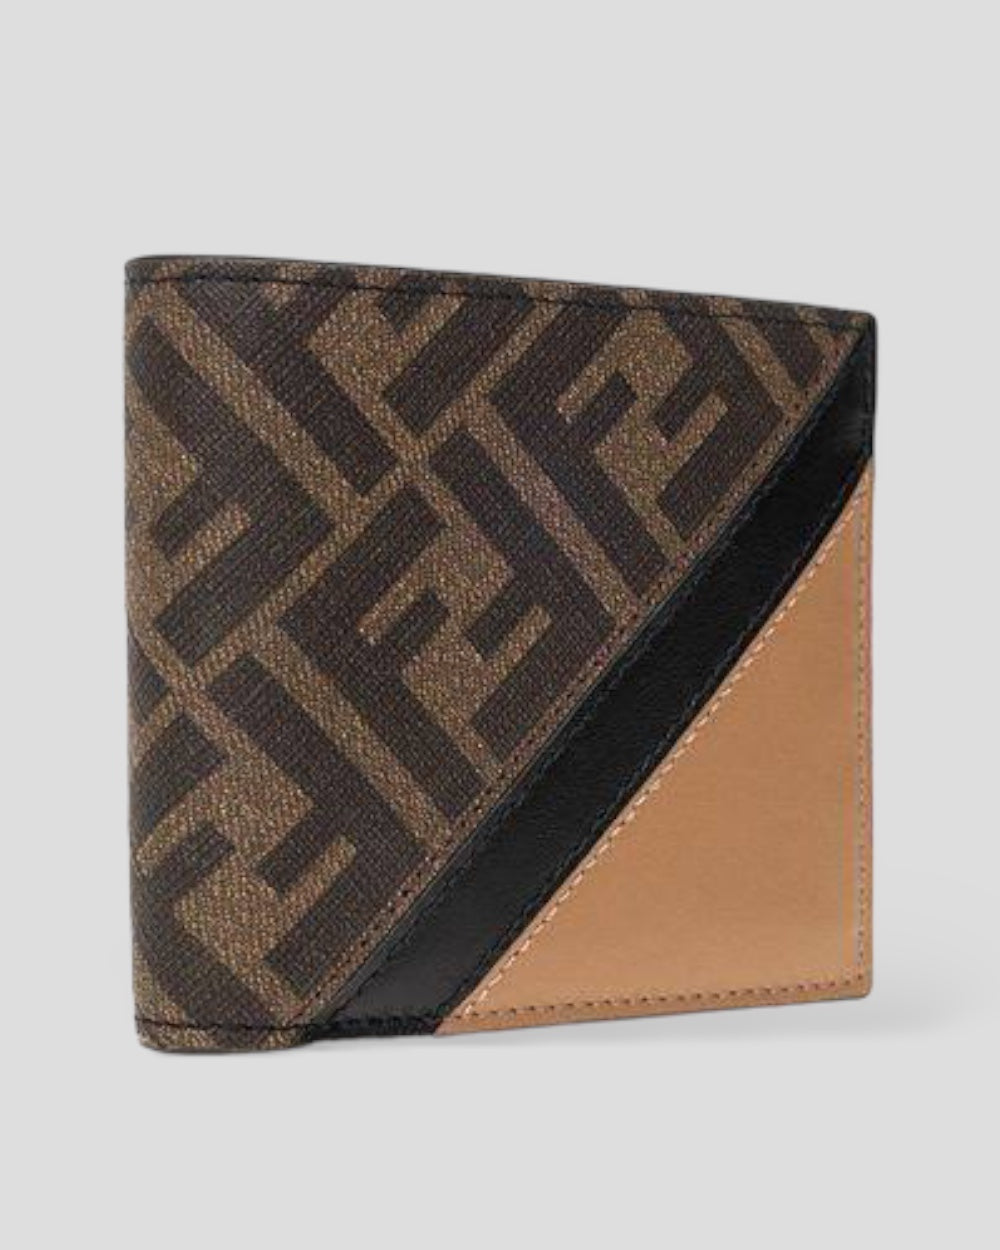 Fendi Fabric and Leather Brown Bifold Wallet